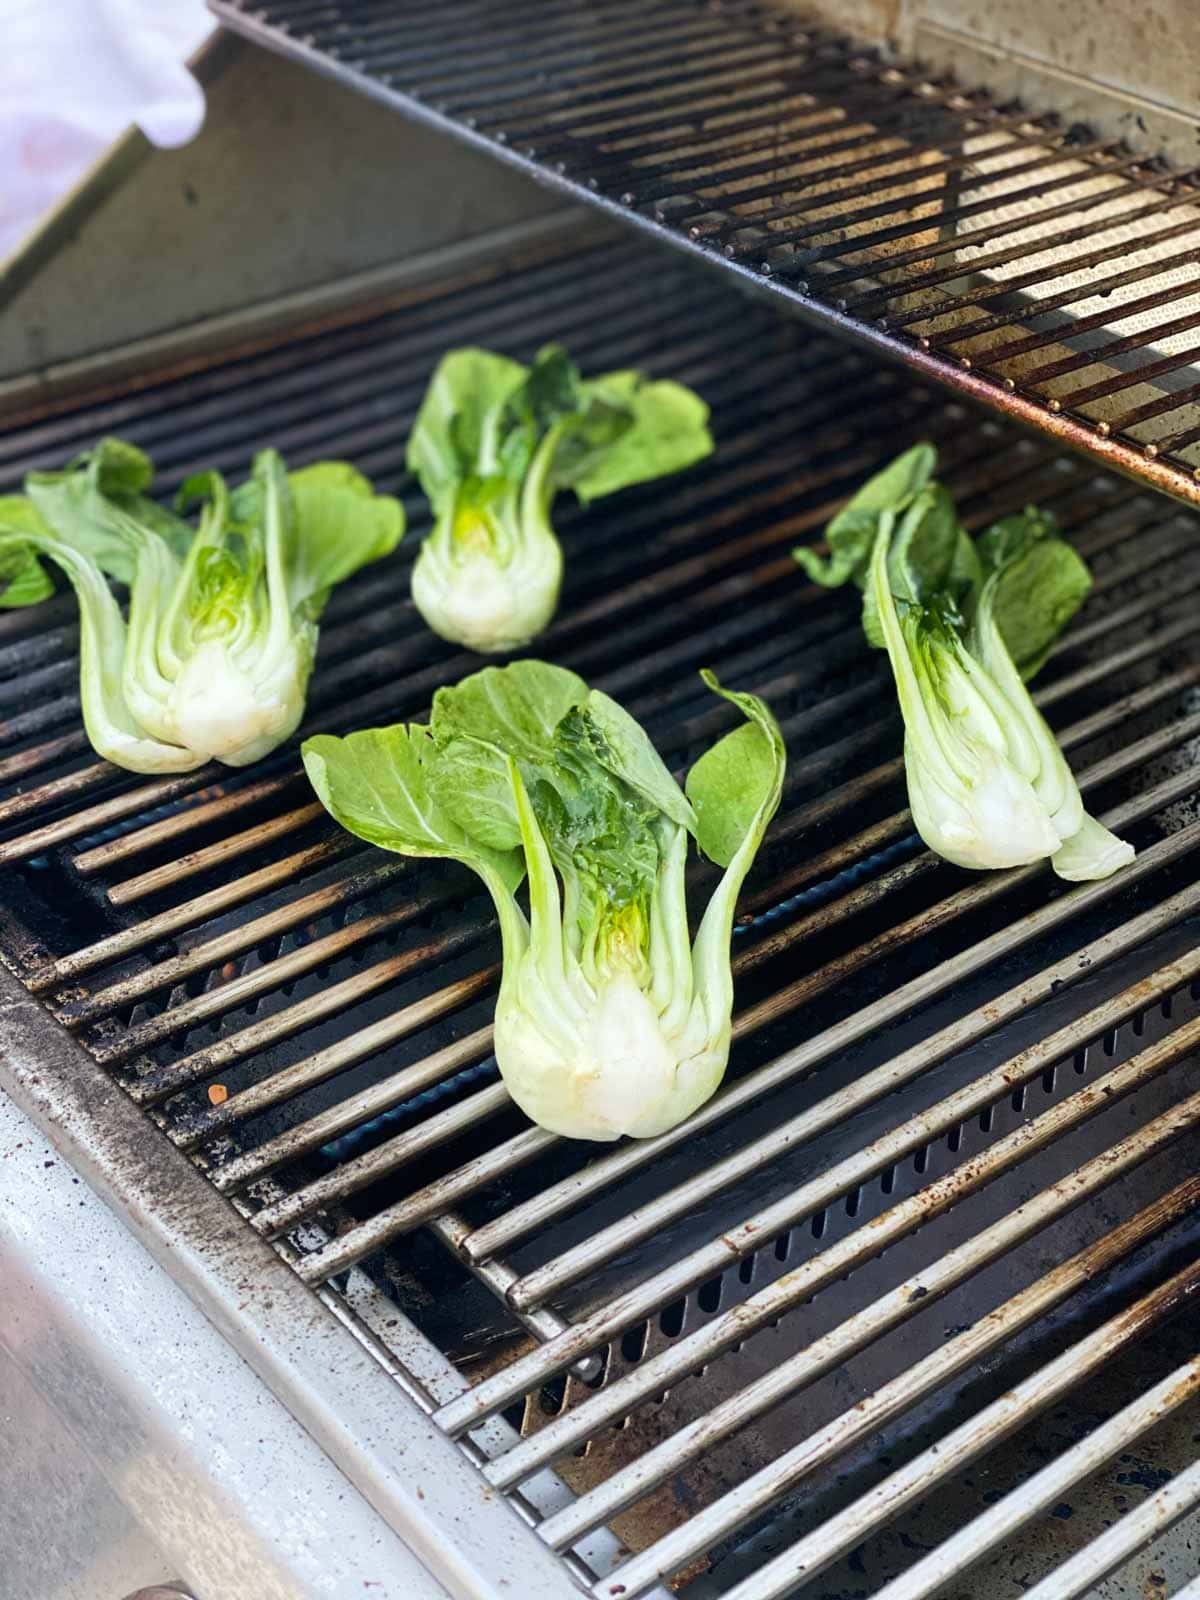 Four bok choy on a grill.